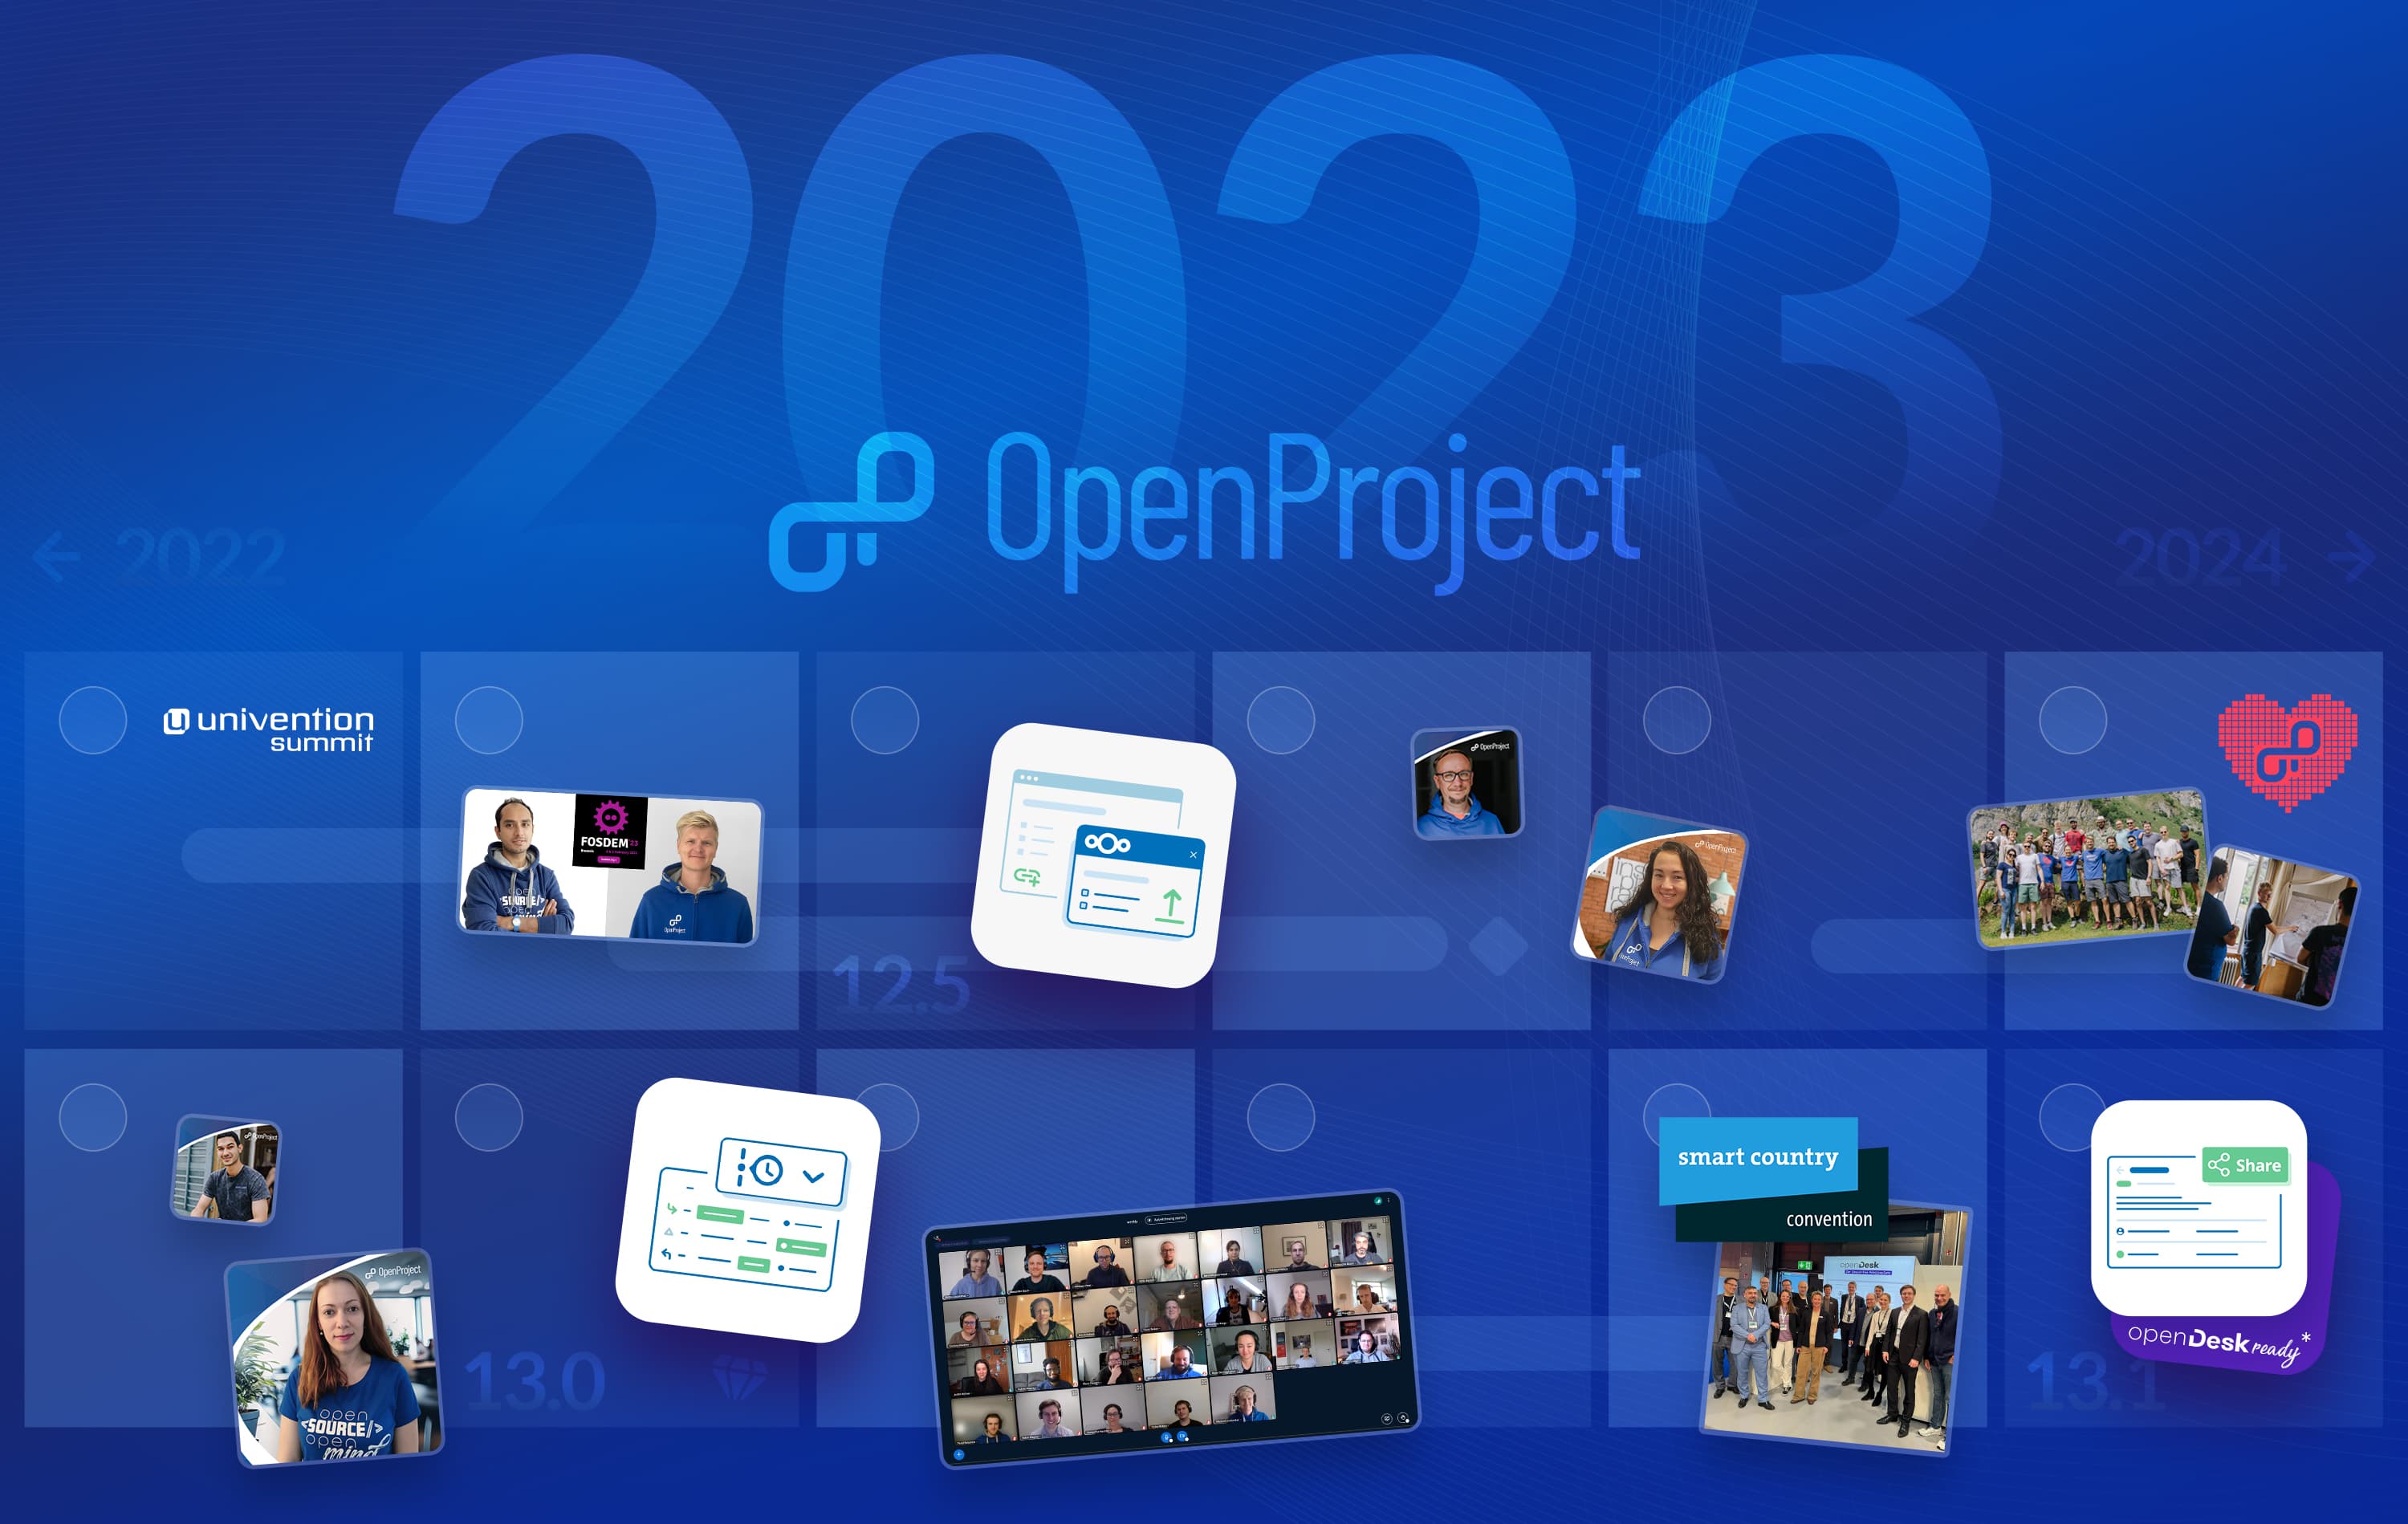 OpenProject team highlights, shown in small images on a calendar format